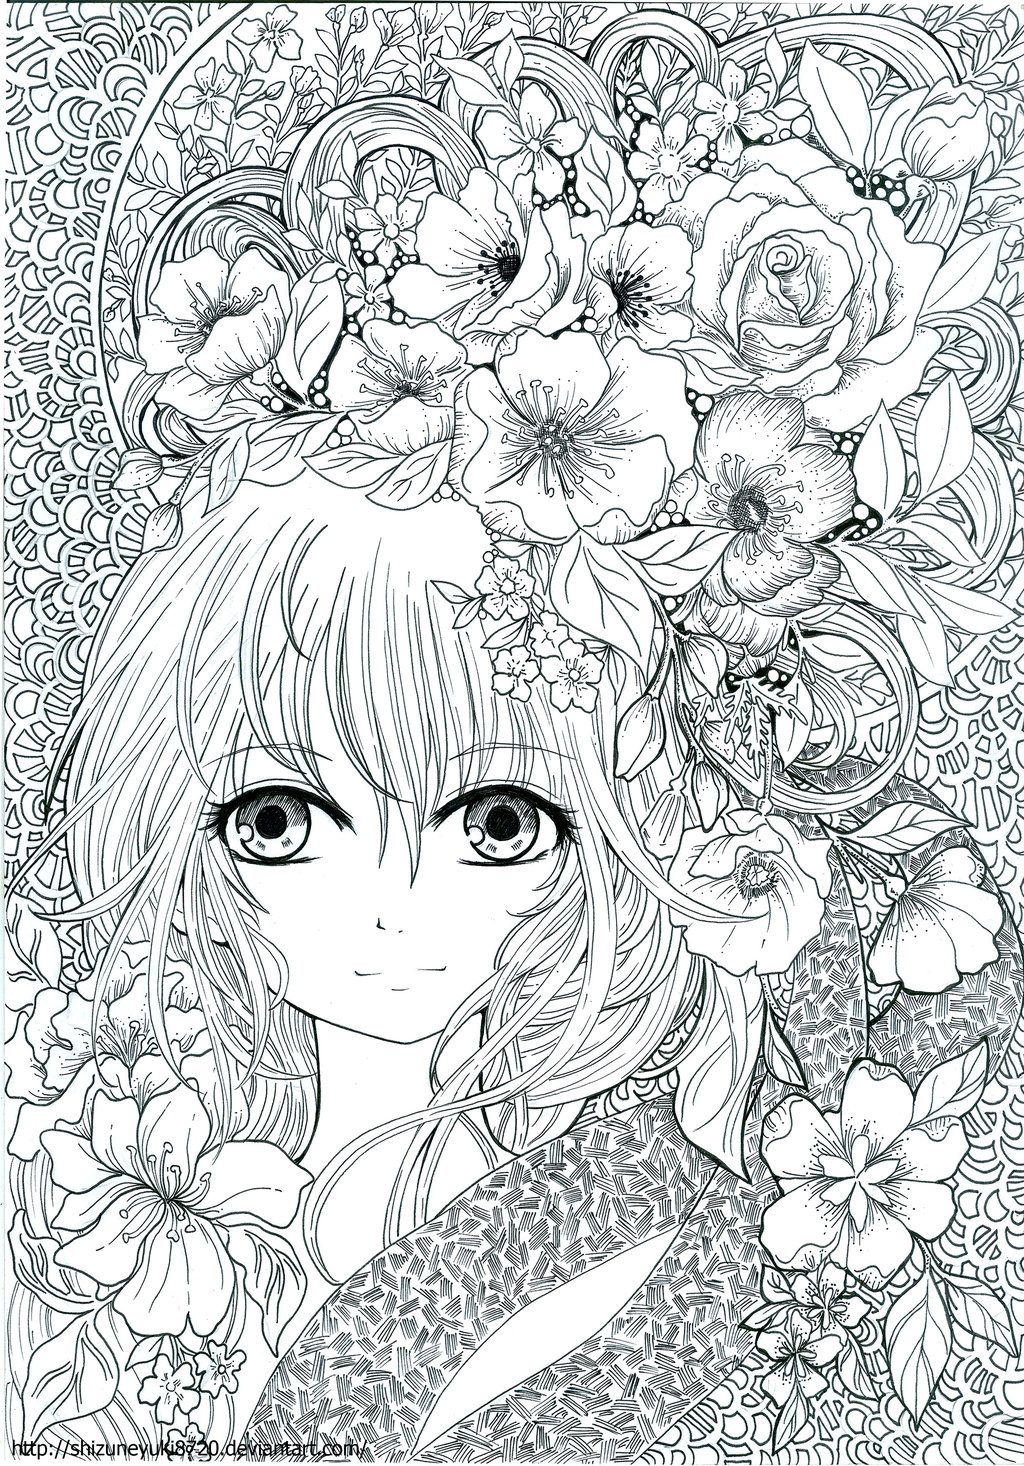 Adult coloring book: Floral Fantasy (Page 20) by shizuneyuki8720 ...